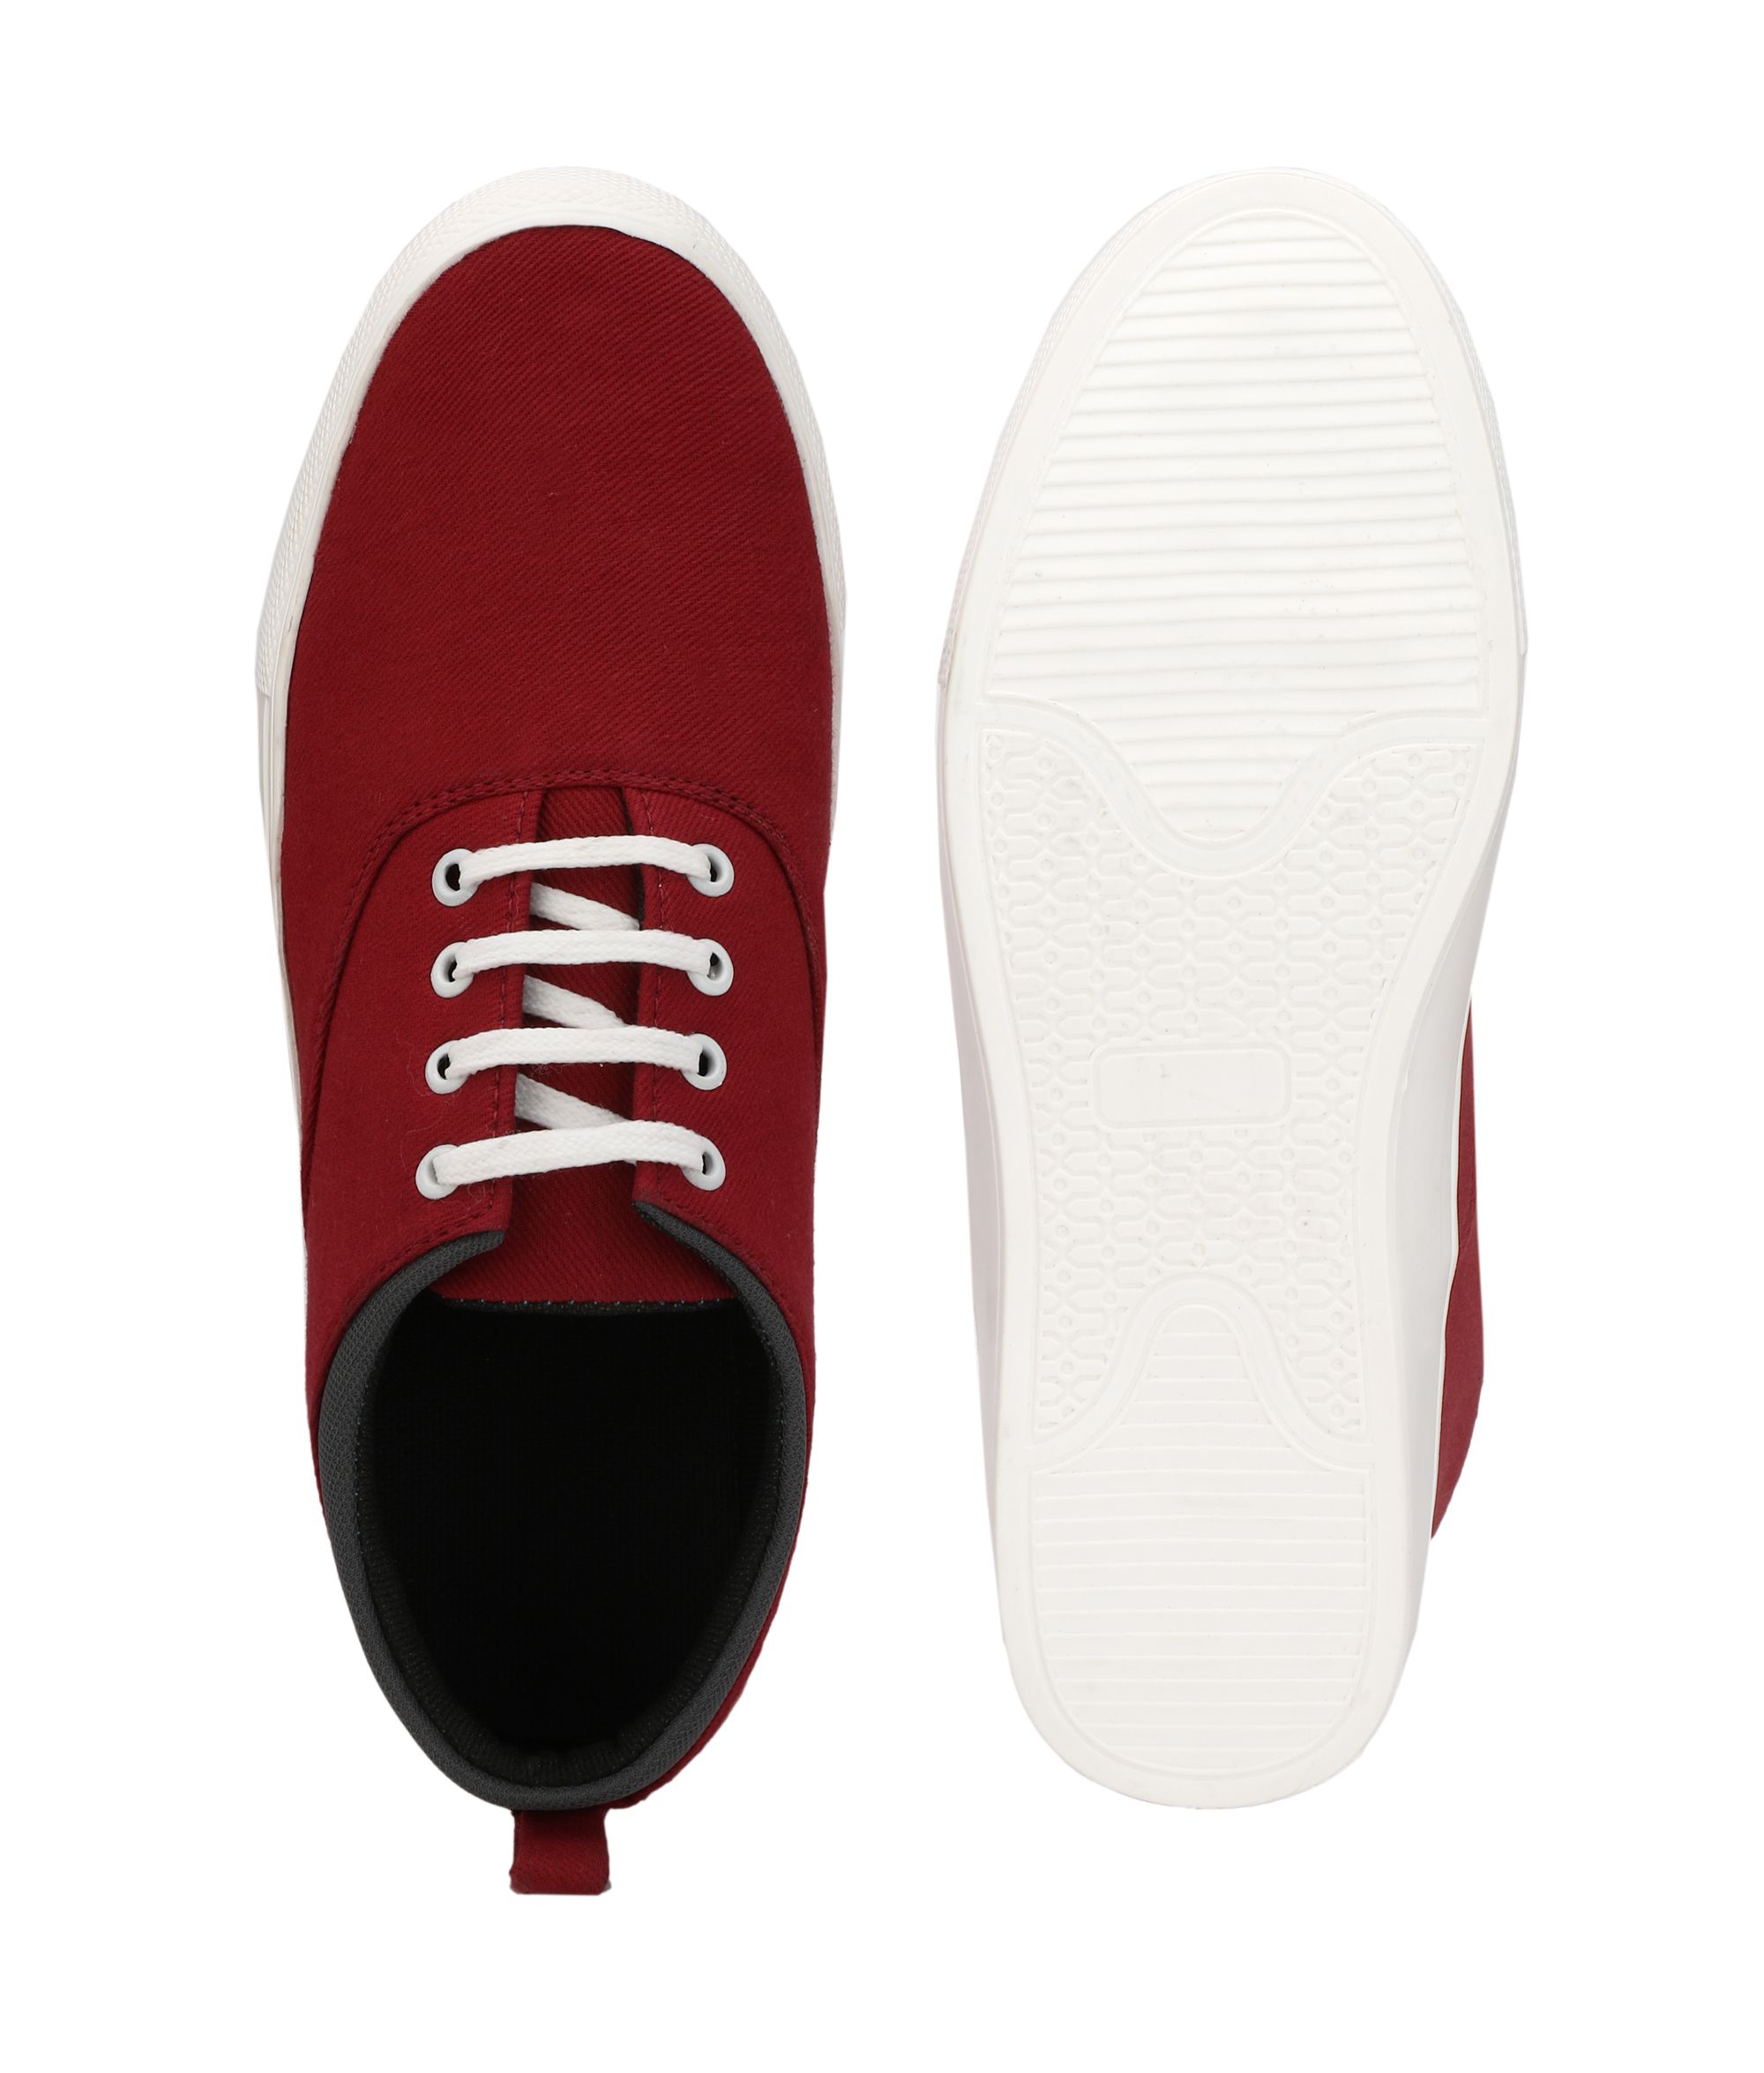 CEONA Casual Shoes Sneakers Maroon Casual Shoes - Buy CEONA Casual ...